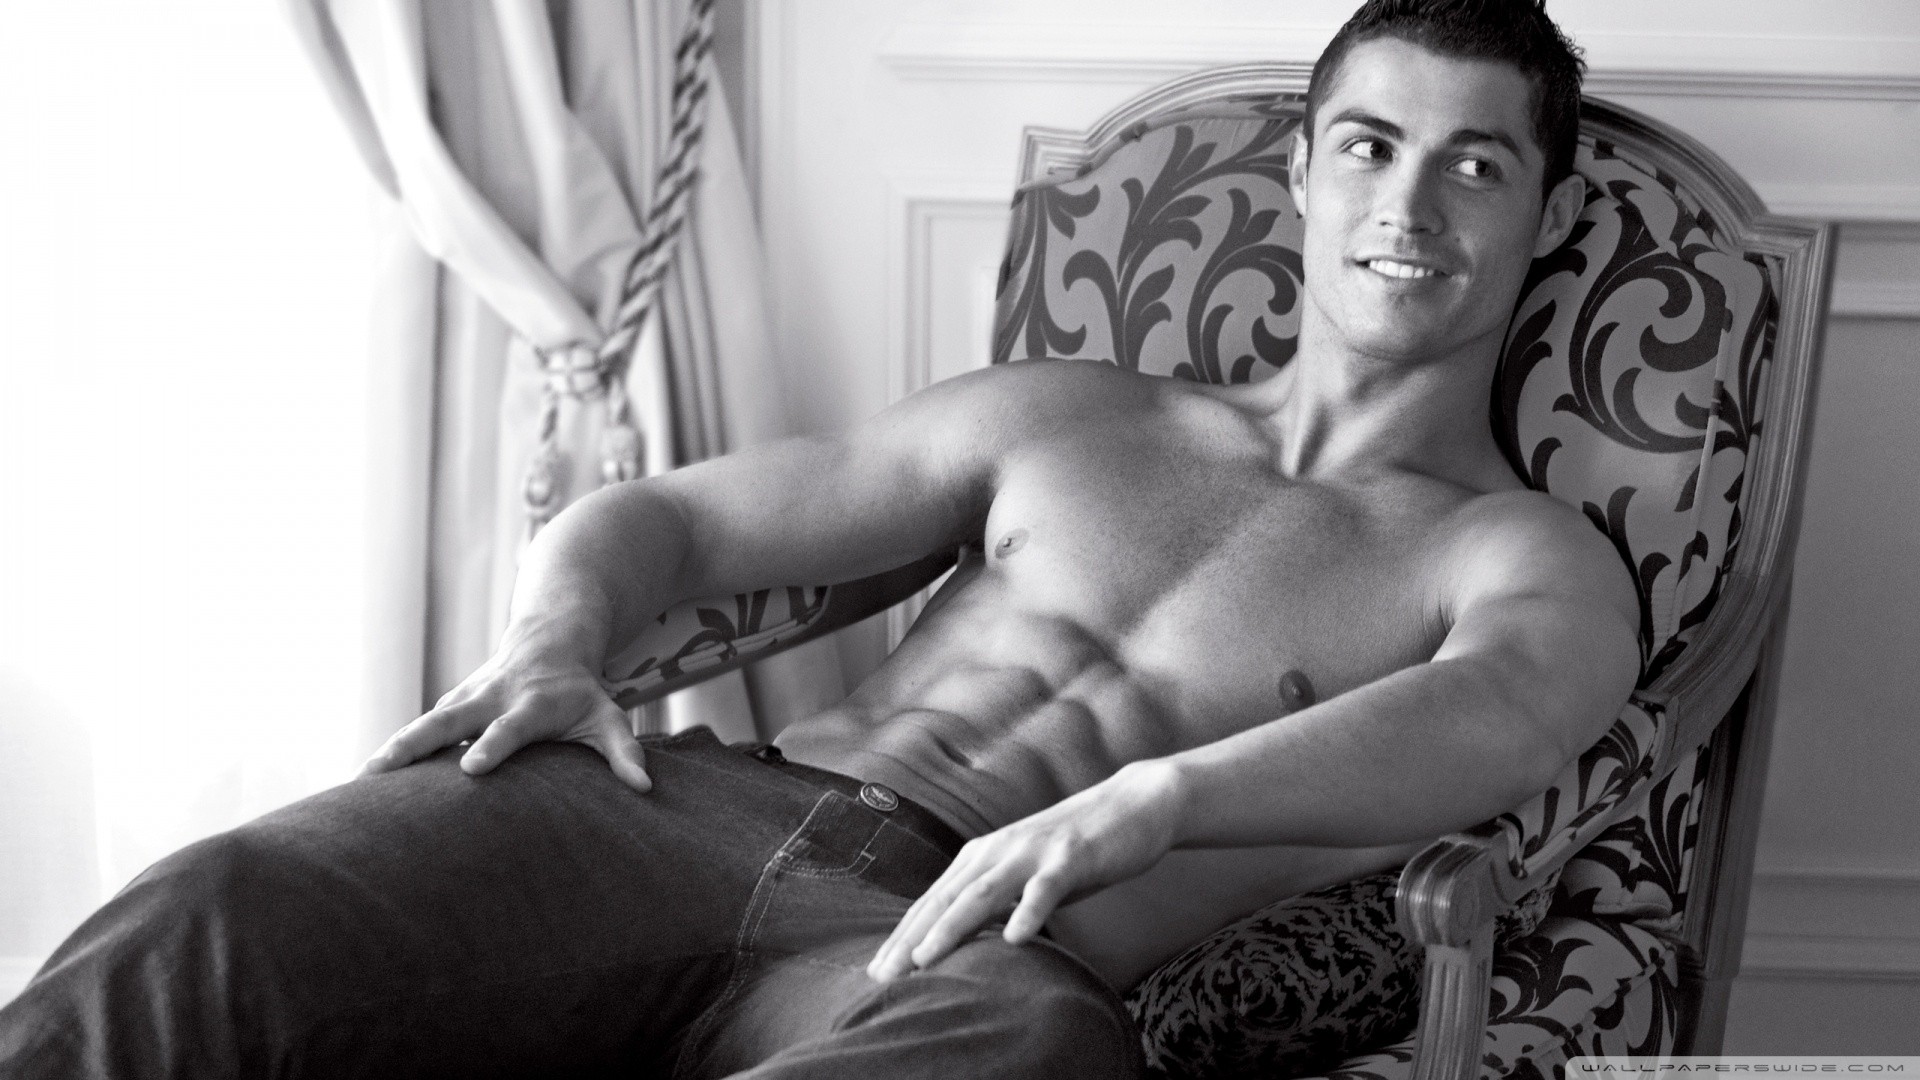 People 1920x1080 Cristiano Ronaldo monochrome footballers men shirtless model celebrity abs muscles men indoors looking away athletes short hair